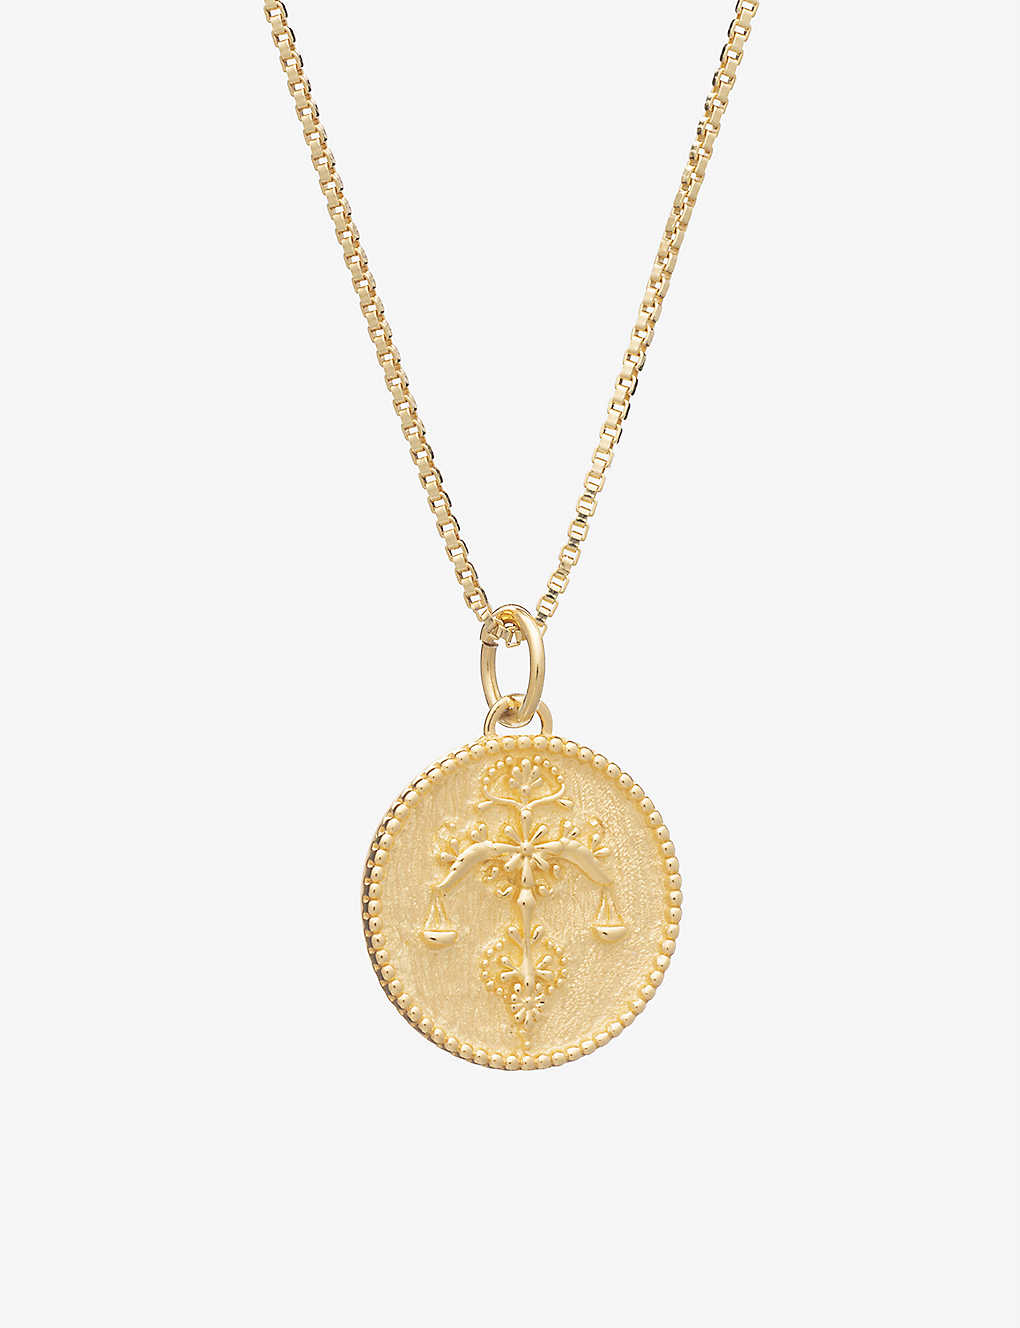 Rachel Jackson Zodiac Coin Libra Short 22ct Gold-plated Sterling Silver Necklace In 22 Carat Gold Plated